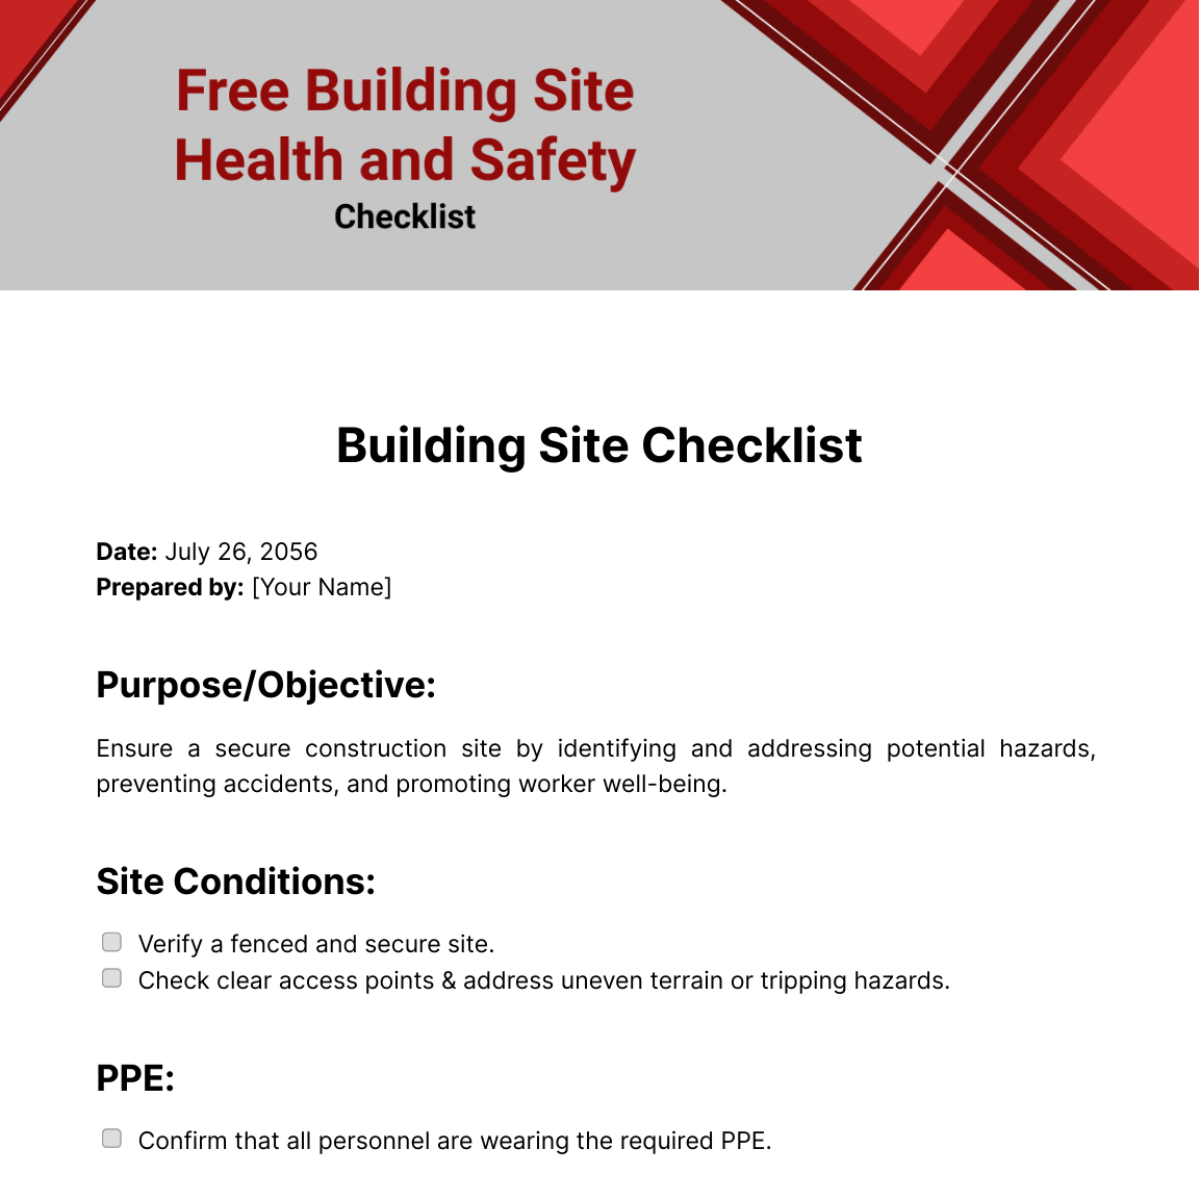 Building Site Health and Safety Checklist Template